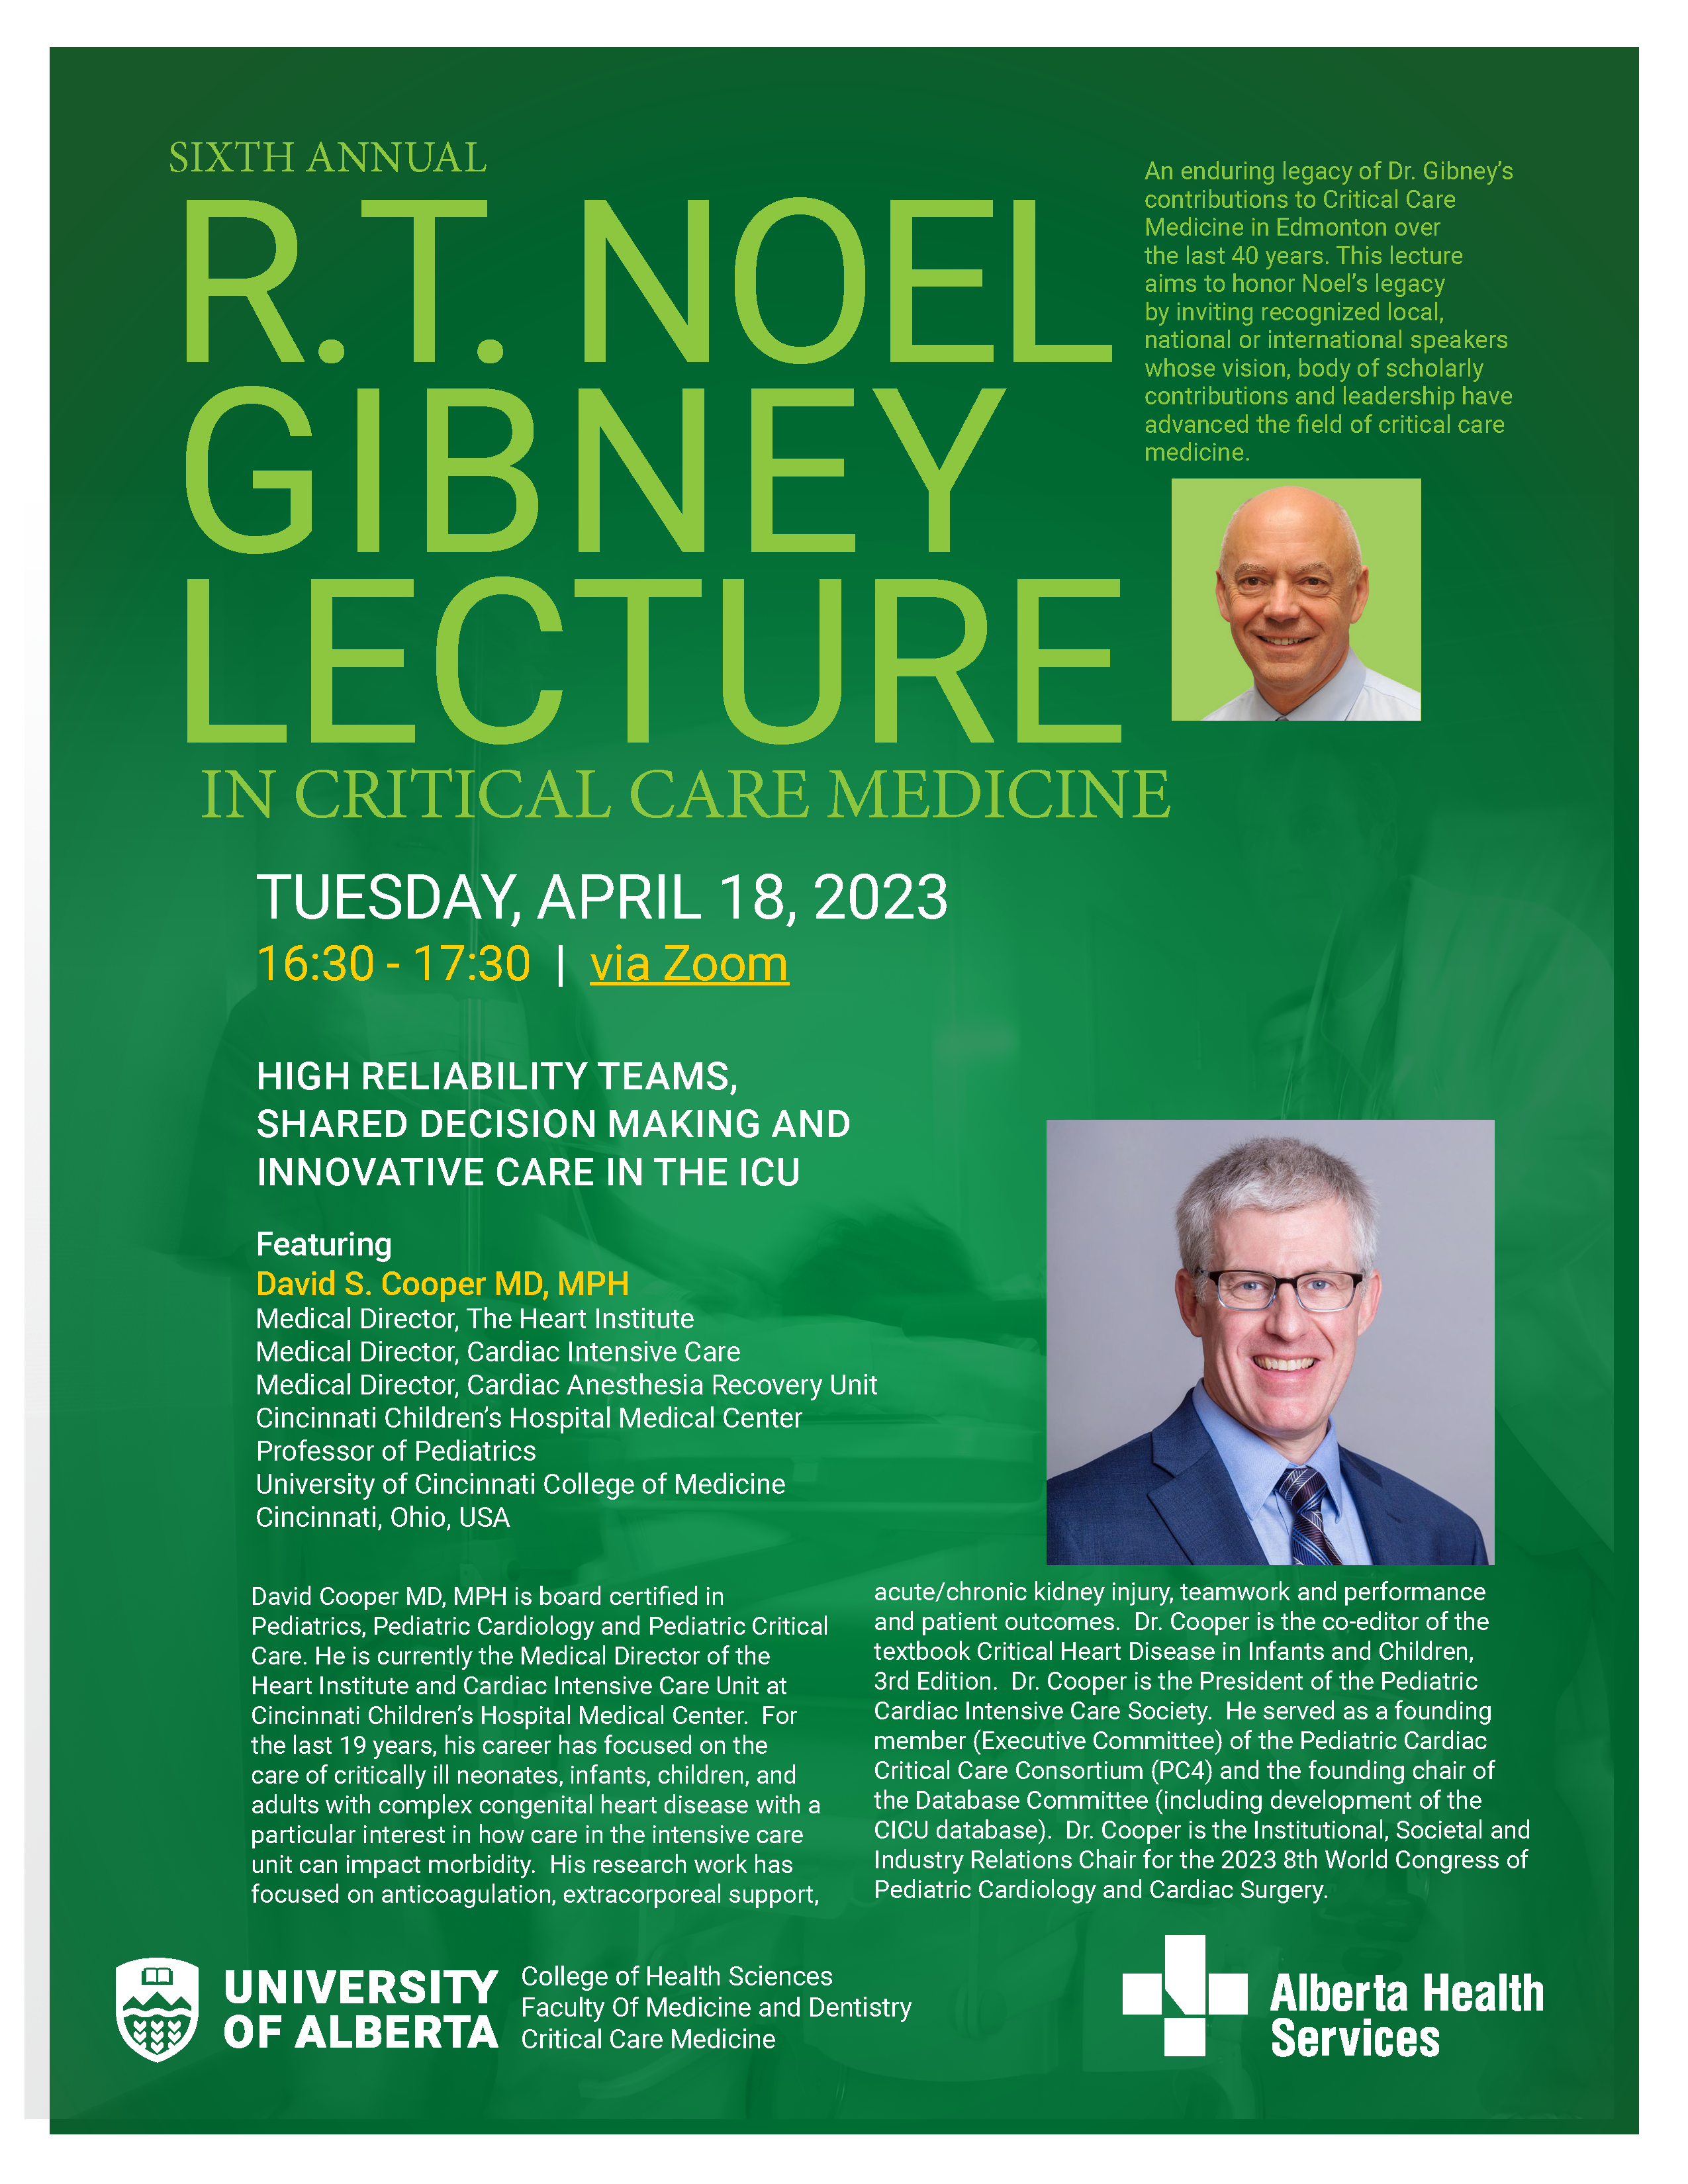 RT Gibney Lecture Poster